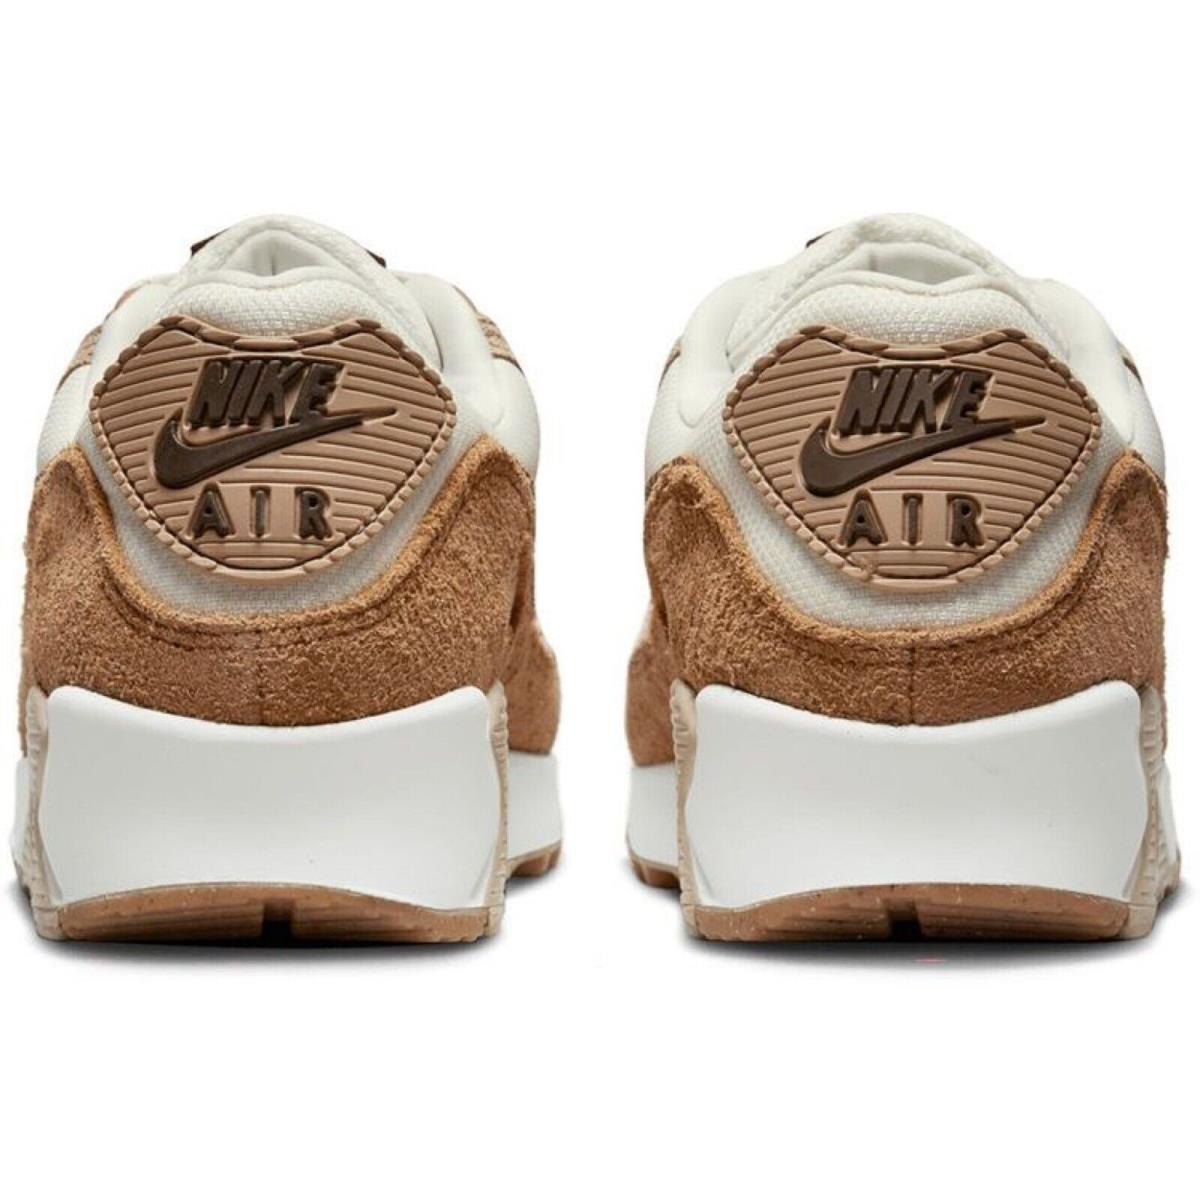 Nike shoes Air Max - Brown , White/red Manufacturer 3